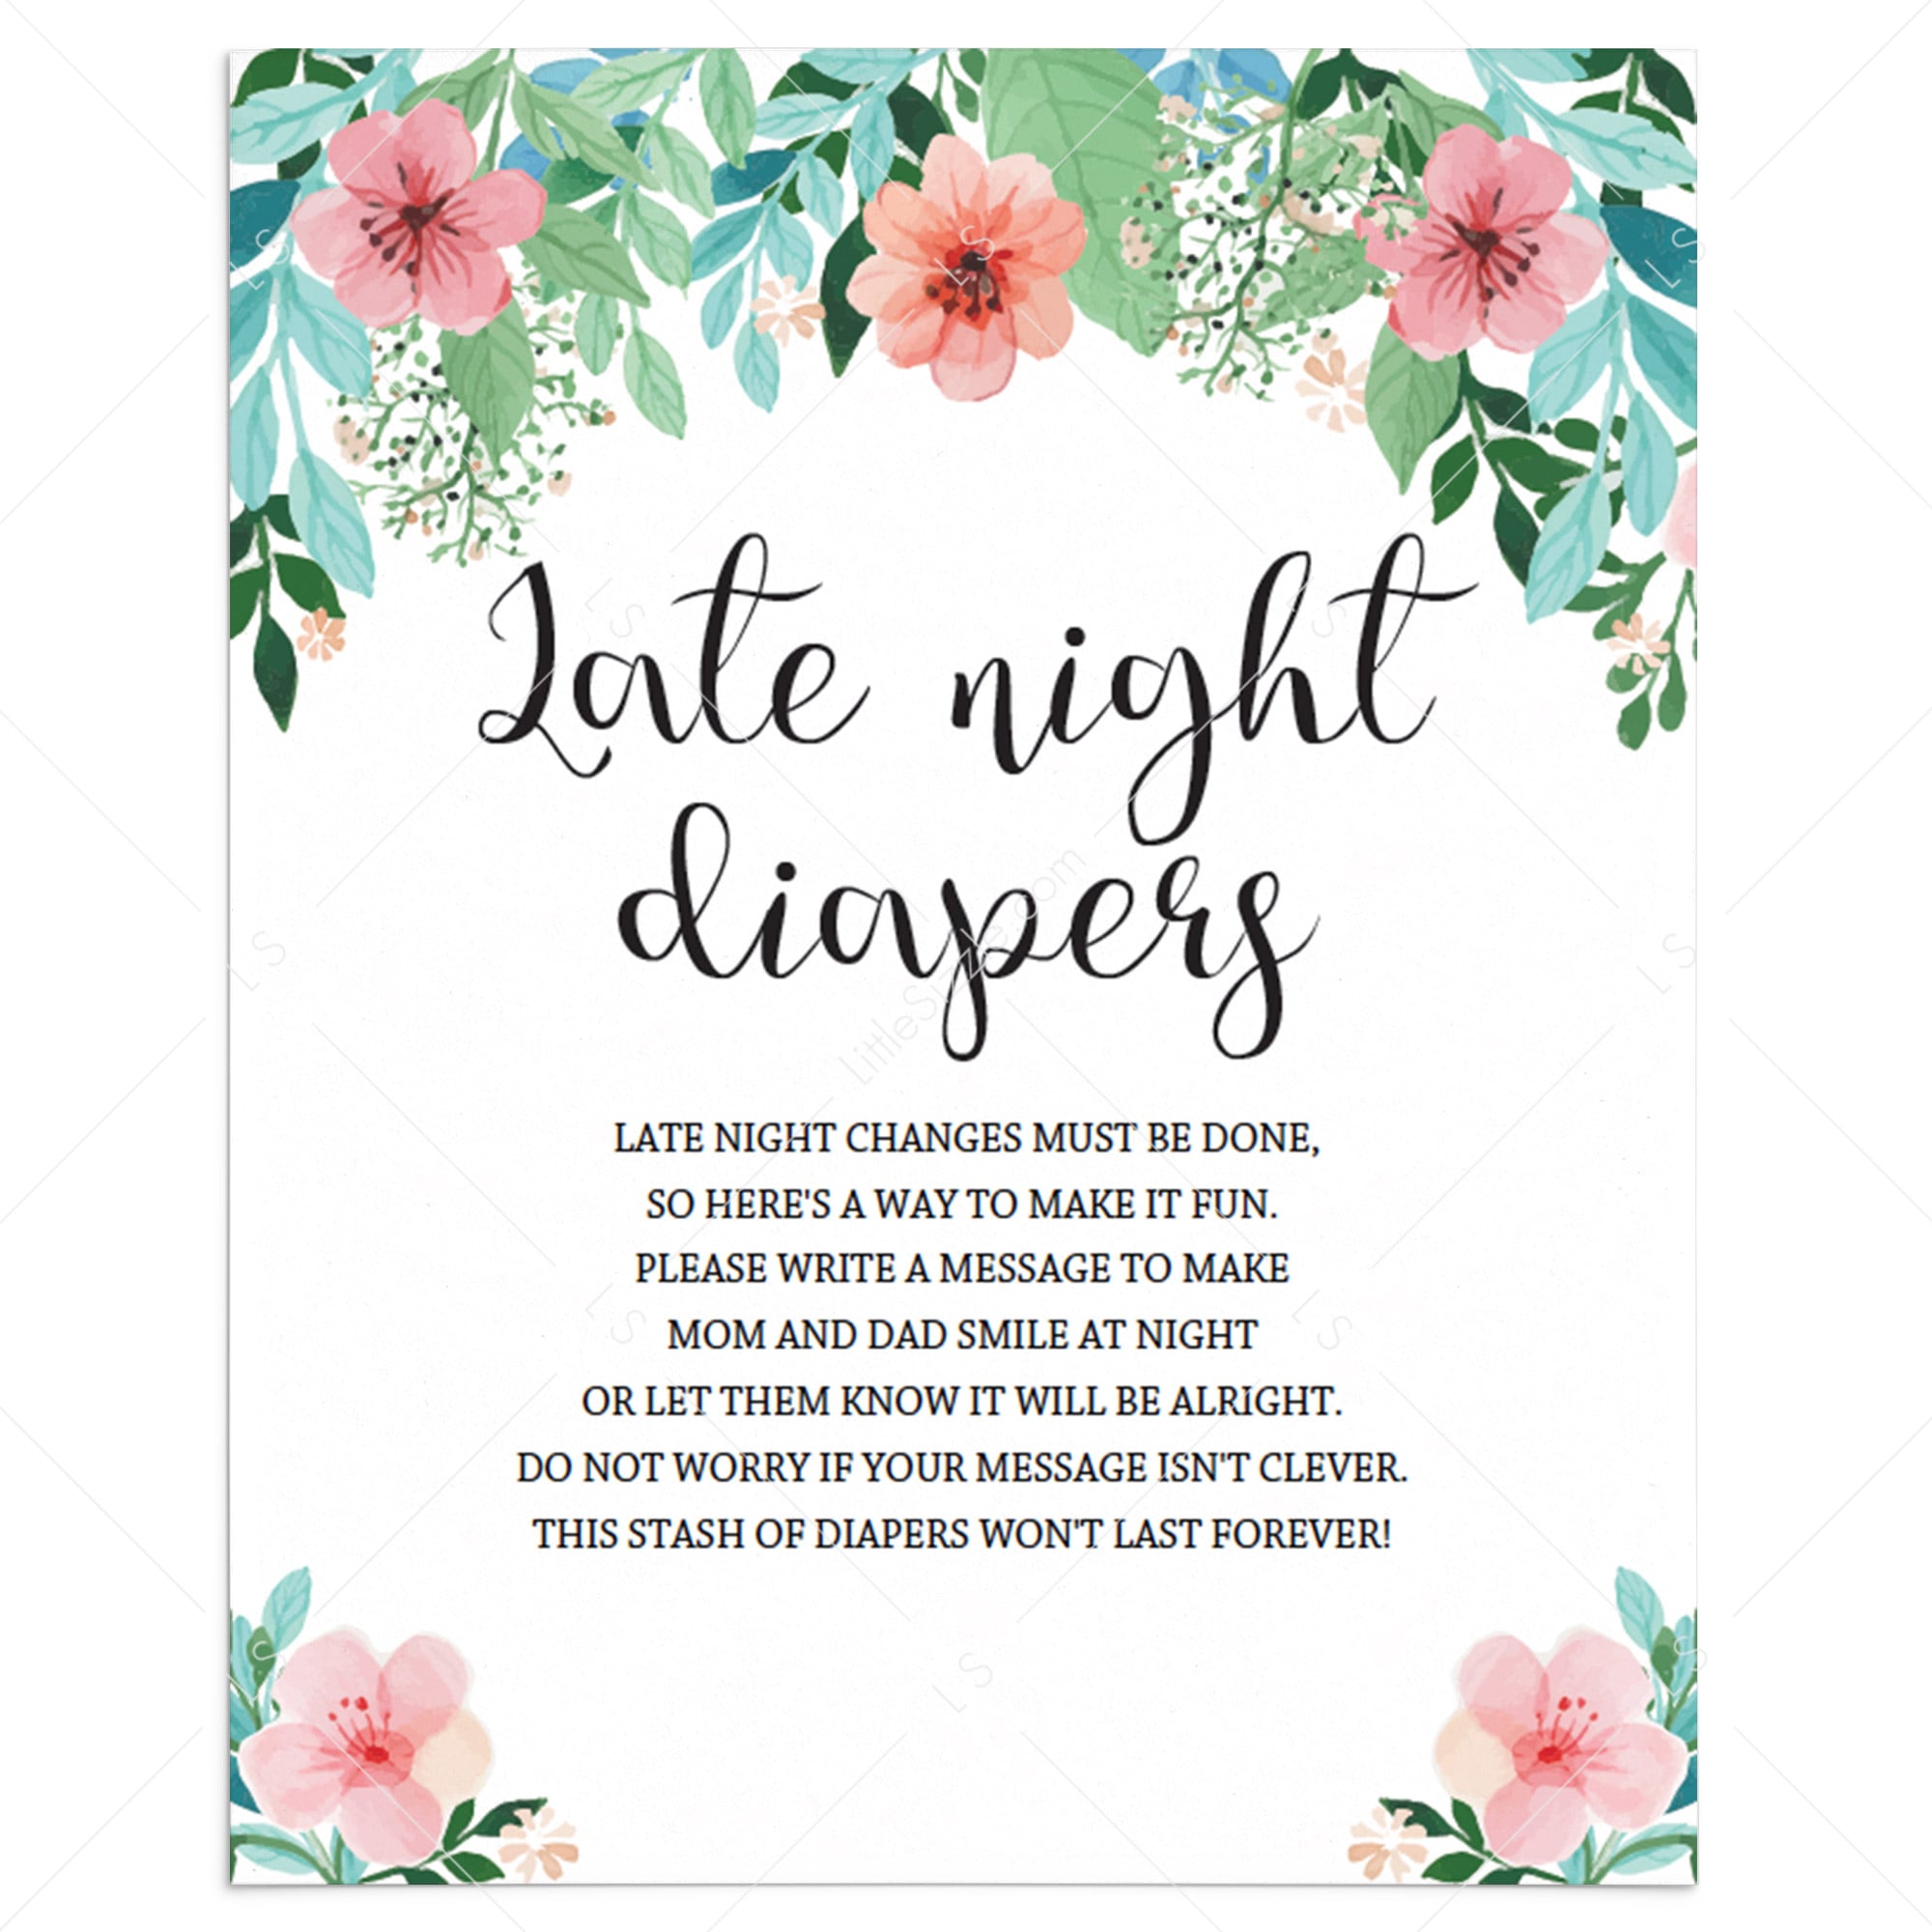 Late night diapers printable sign with pink flowers by LittleSizzle